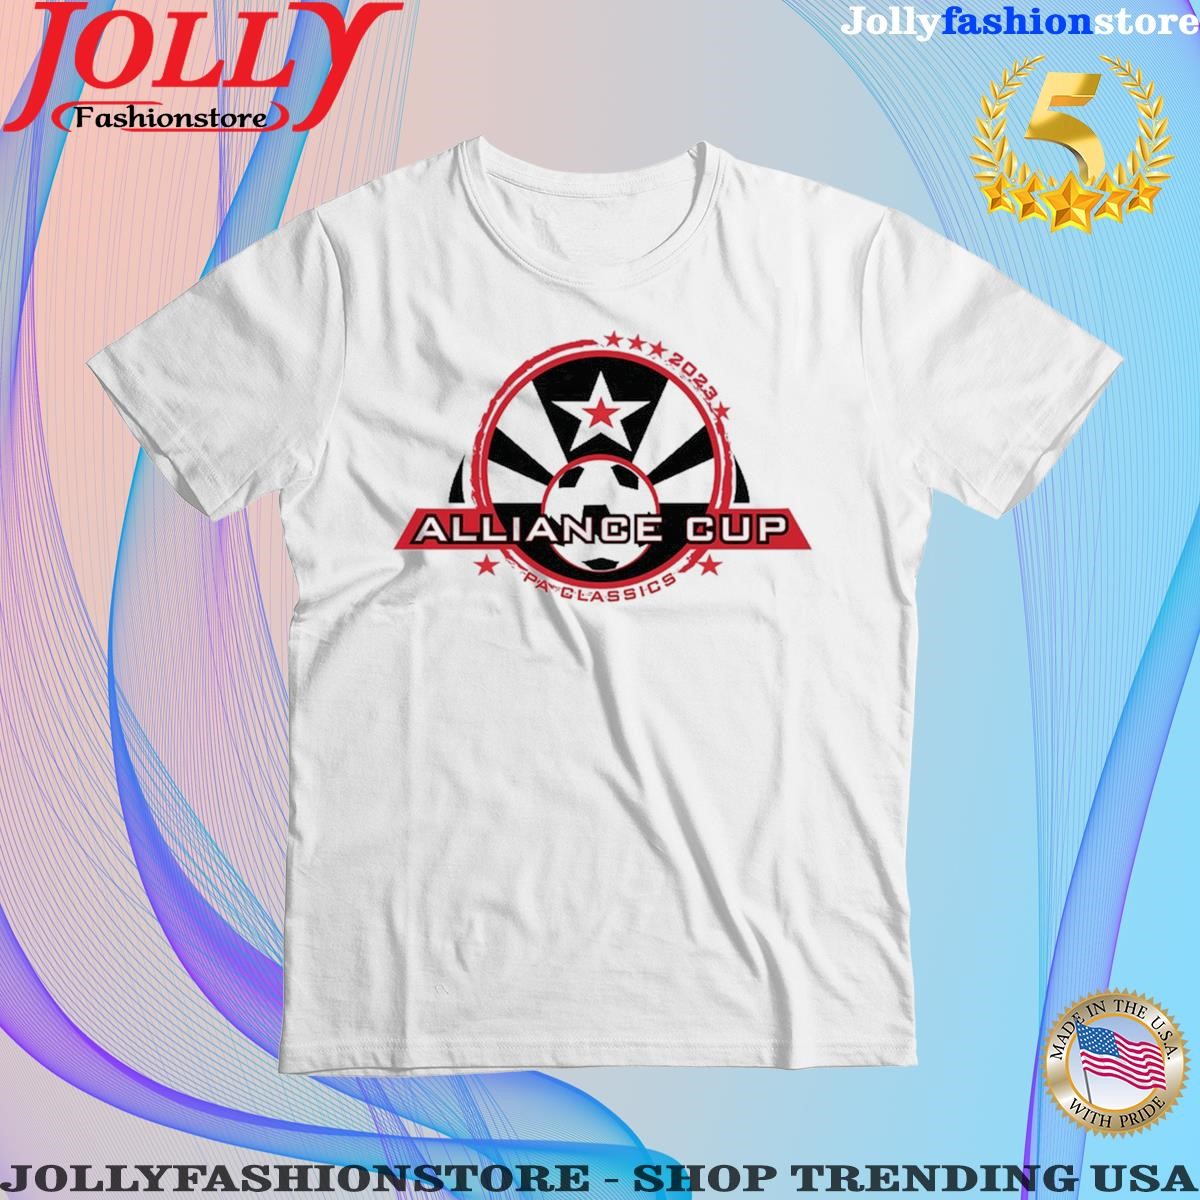 Trending 2023 The Alliance Cup Shirt